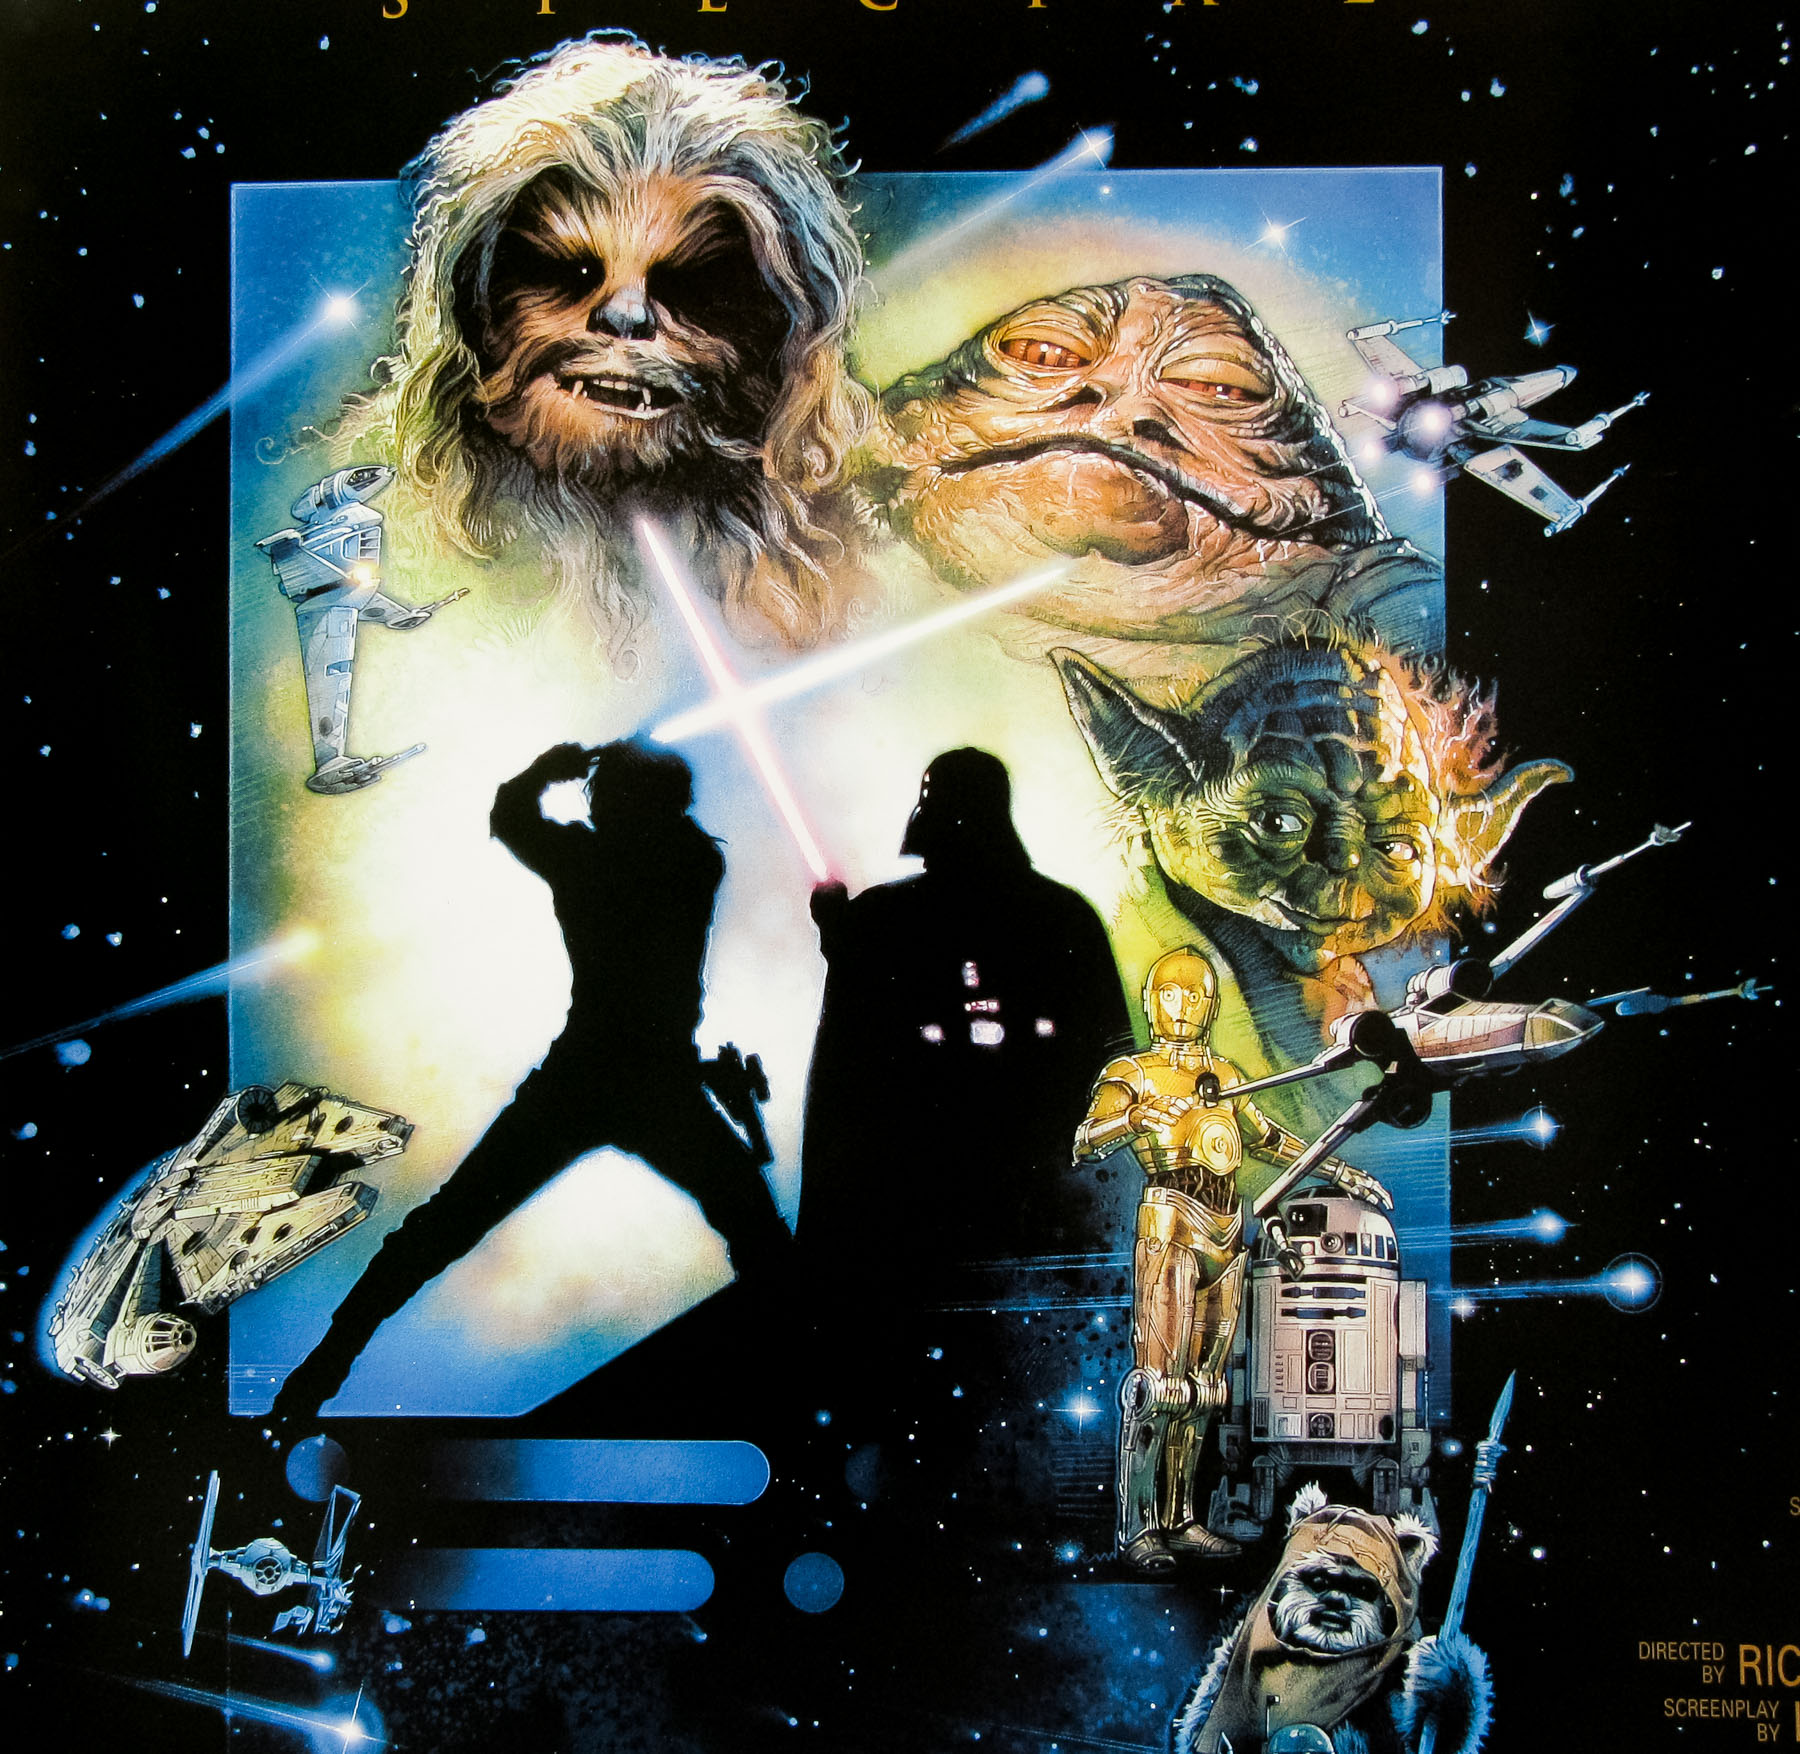 Return Of The Jedi / quad / Special Edition rerelease / UK